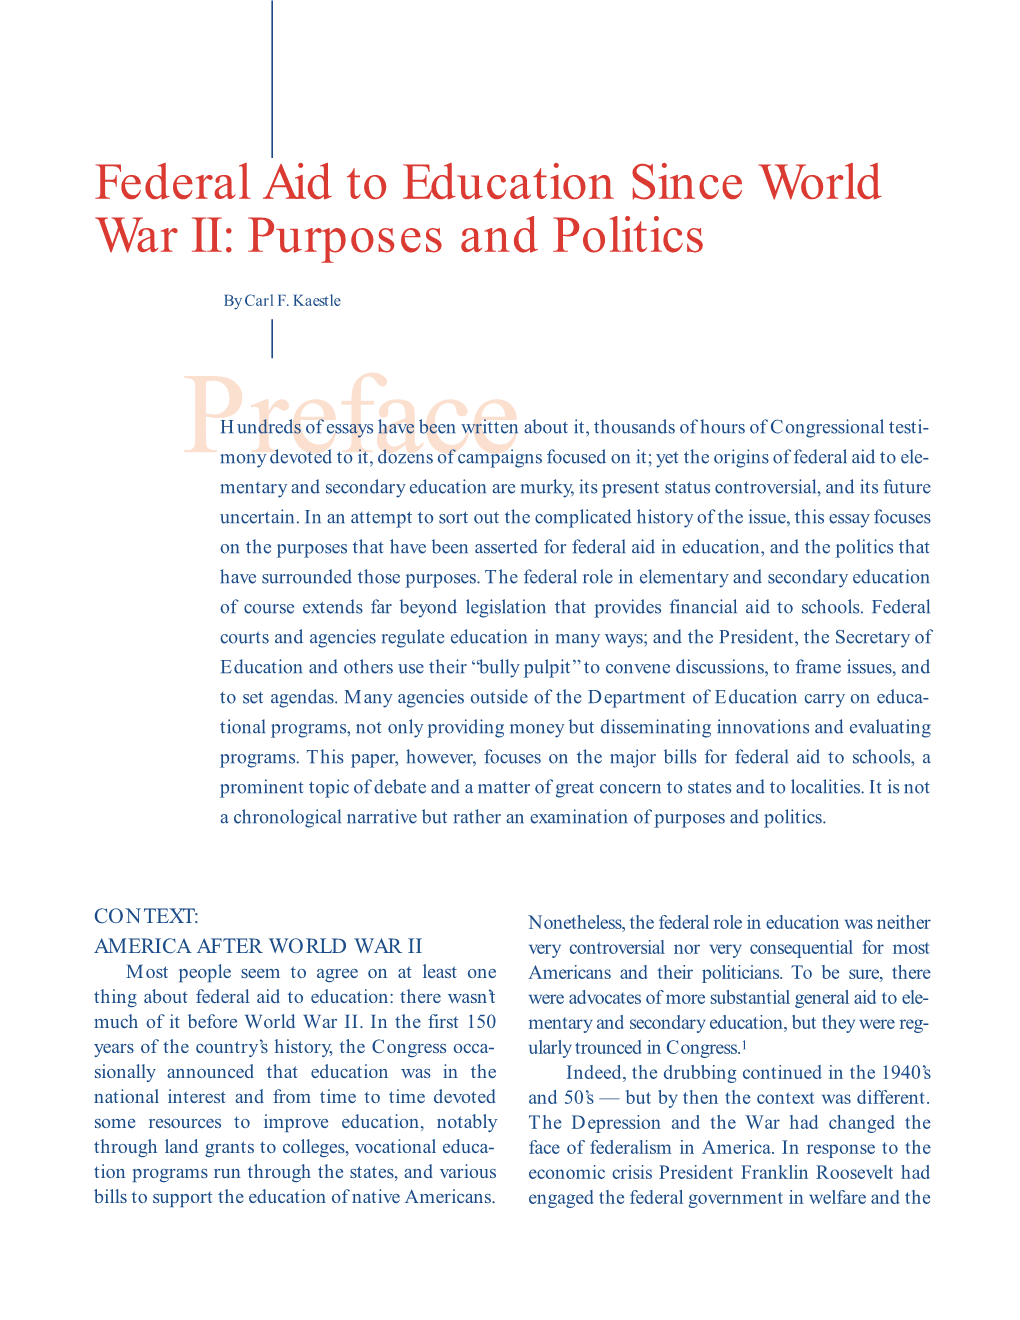 Federal Aid to Education Since World War II: Purposes and Politics